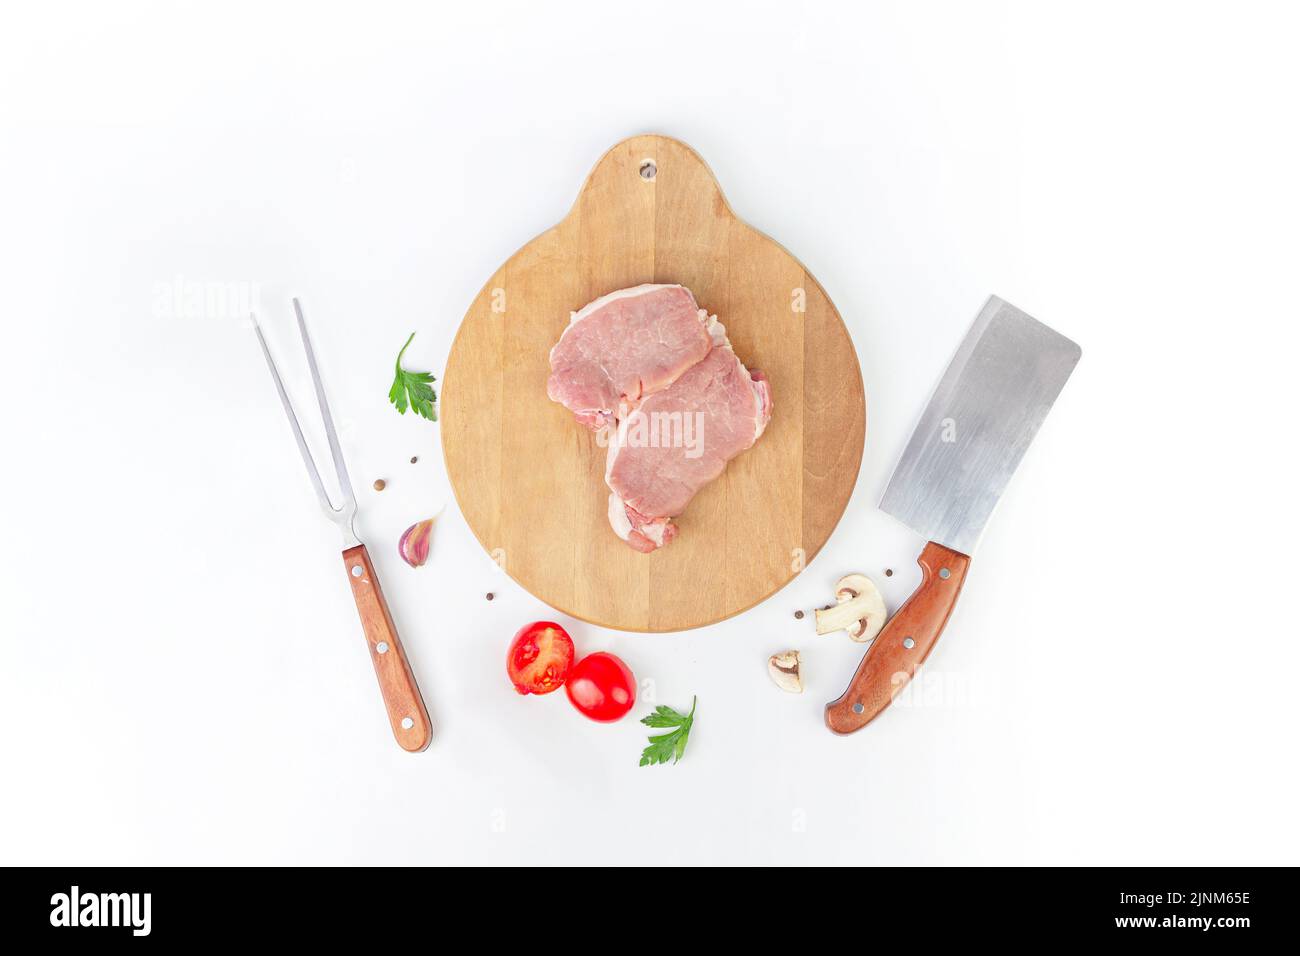 Raw meat with garlic, tomato, spice, pepper, champignon meat fork and knife Stock Photo